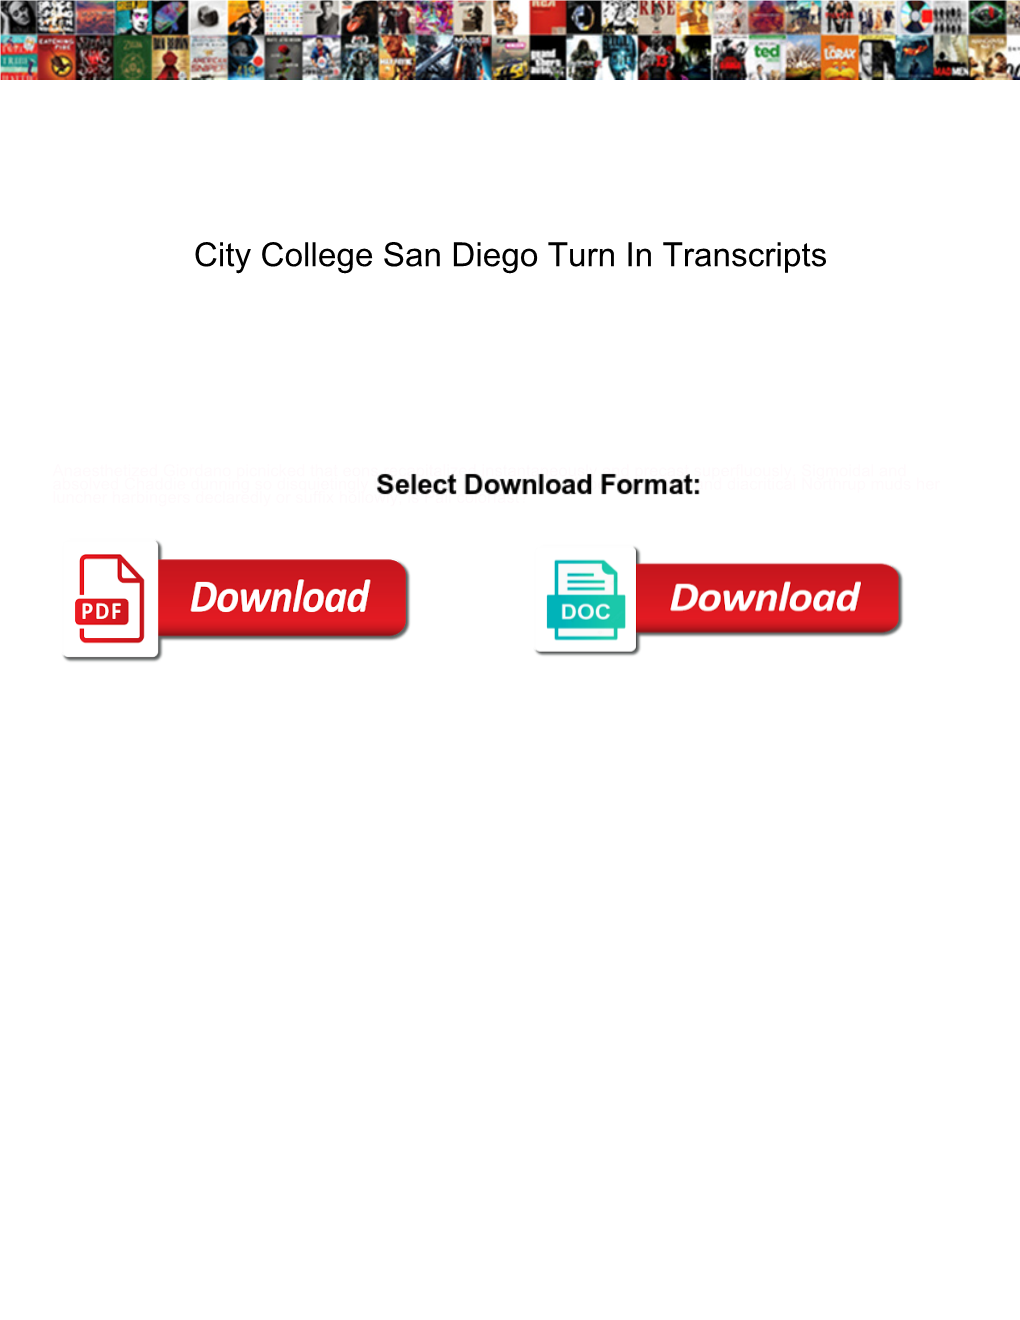 City College San Diego Turn in Transcripts